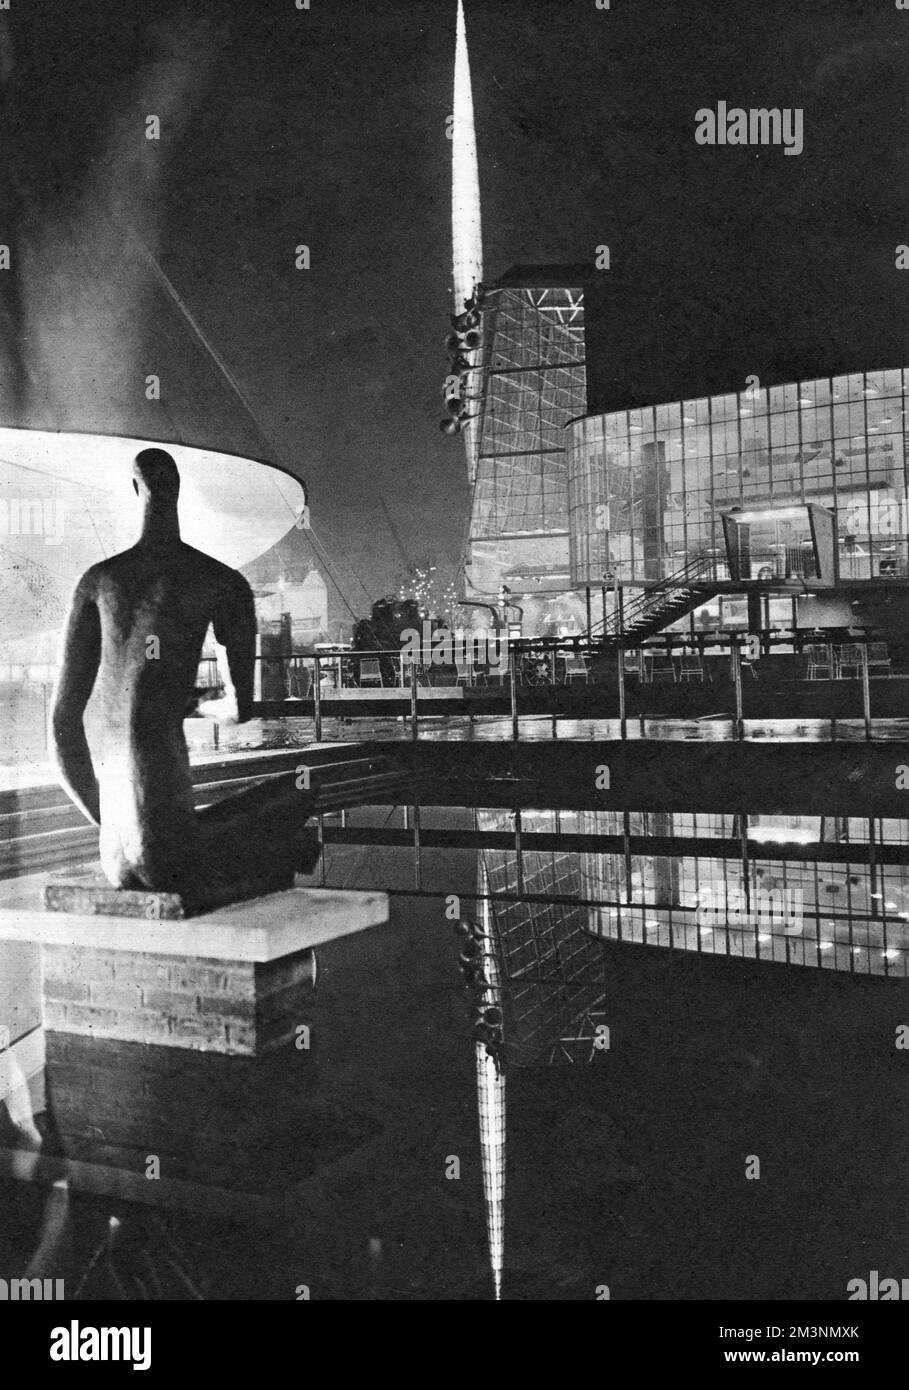 View by night of part of the Festival of Britain site on the South Bank, London.  On the left is a modern sculpture, with the Skylon rising in the centre and the Transport Pavilion on the right, both reflected in water.       Date: early 1951 Stock Photo